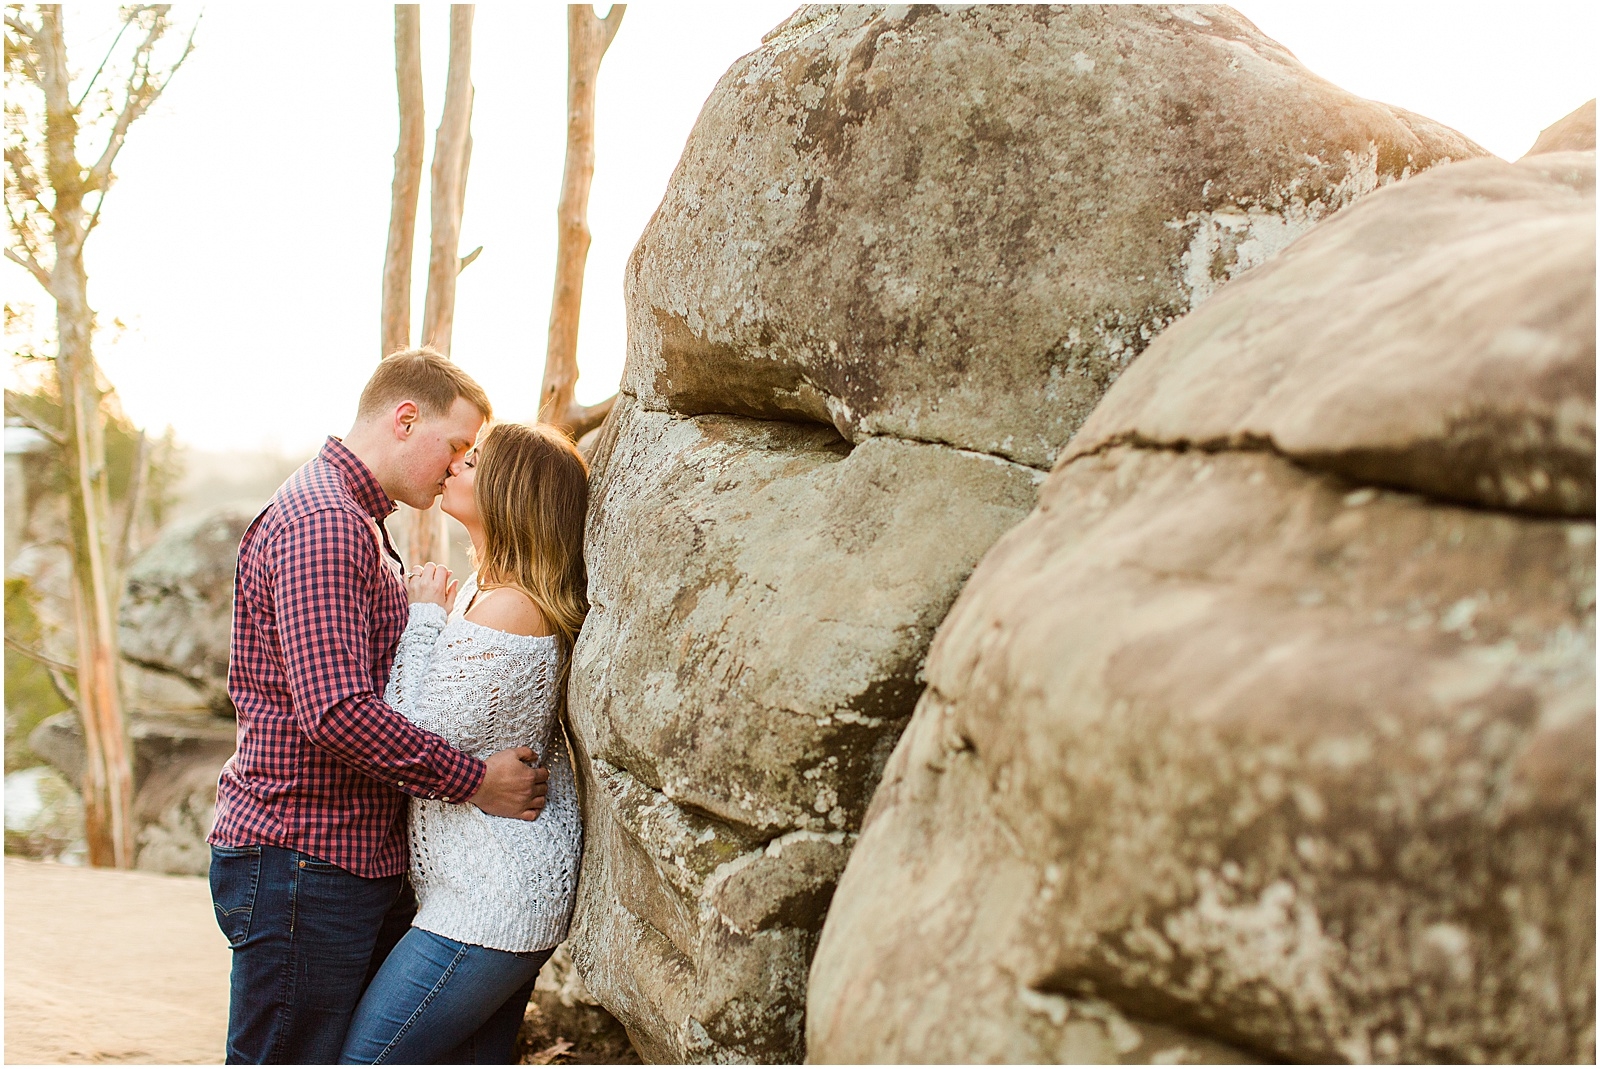 A Sunny Garden of the Gods Engagement Session | Shiloh and Lee | Bret and Brandie Photography064.jpg